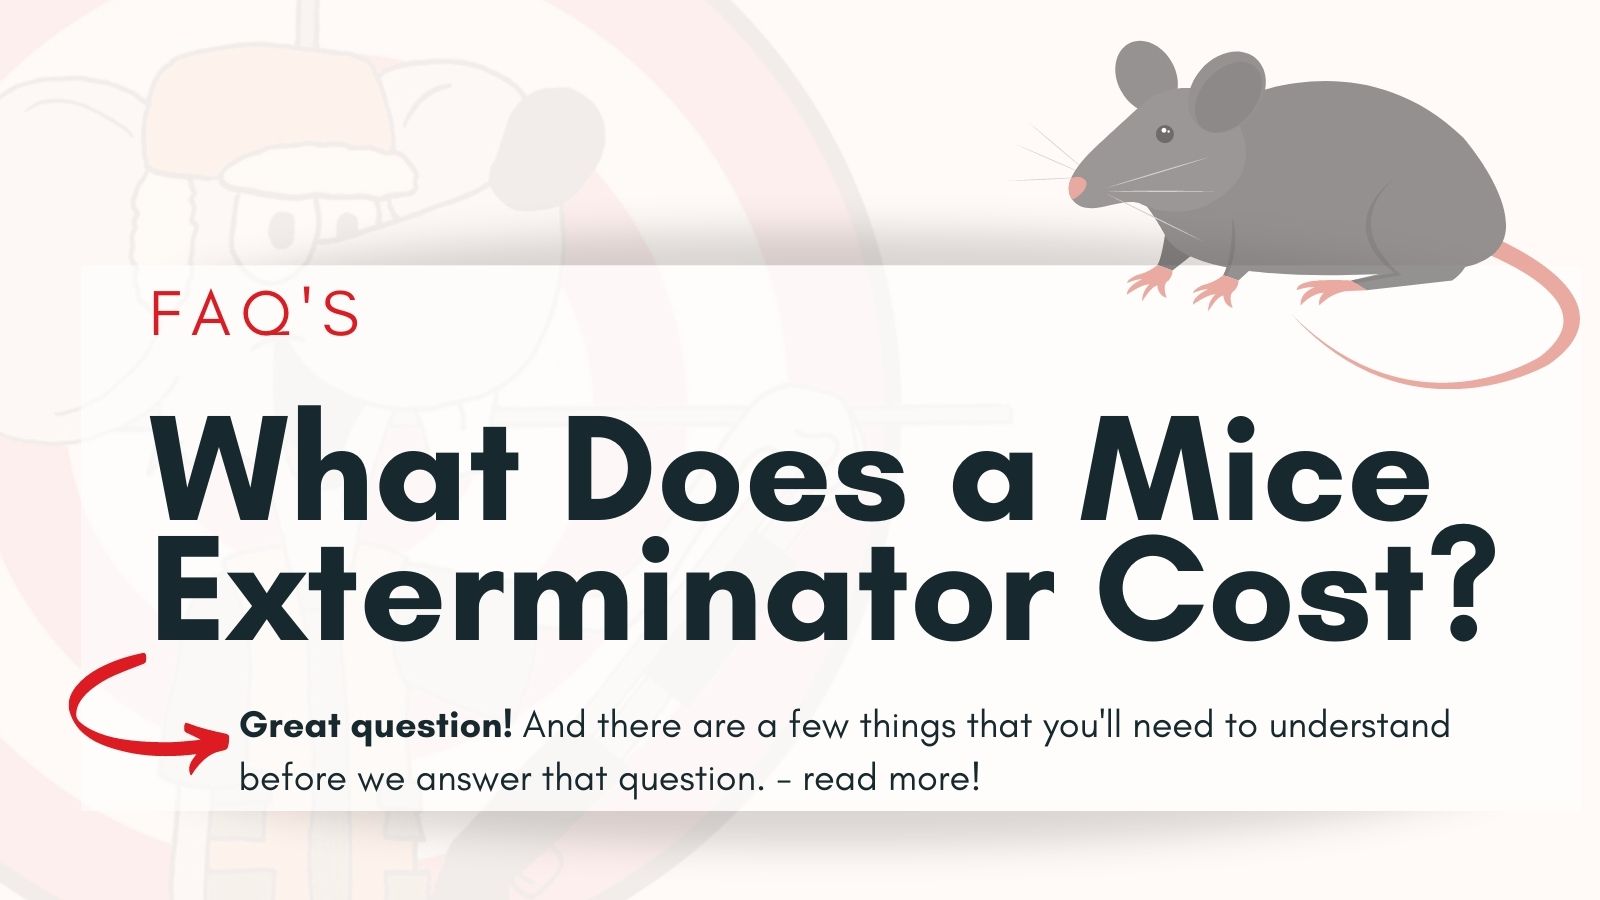 WHAT DOES AN EXTERMINATOR COST